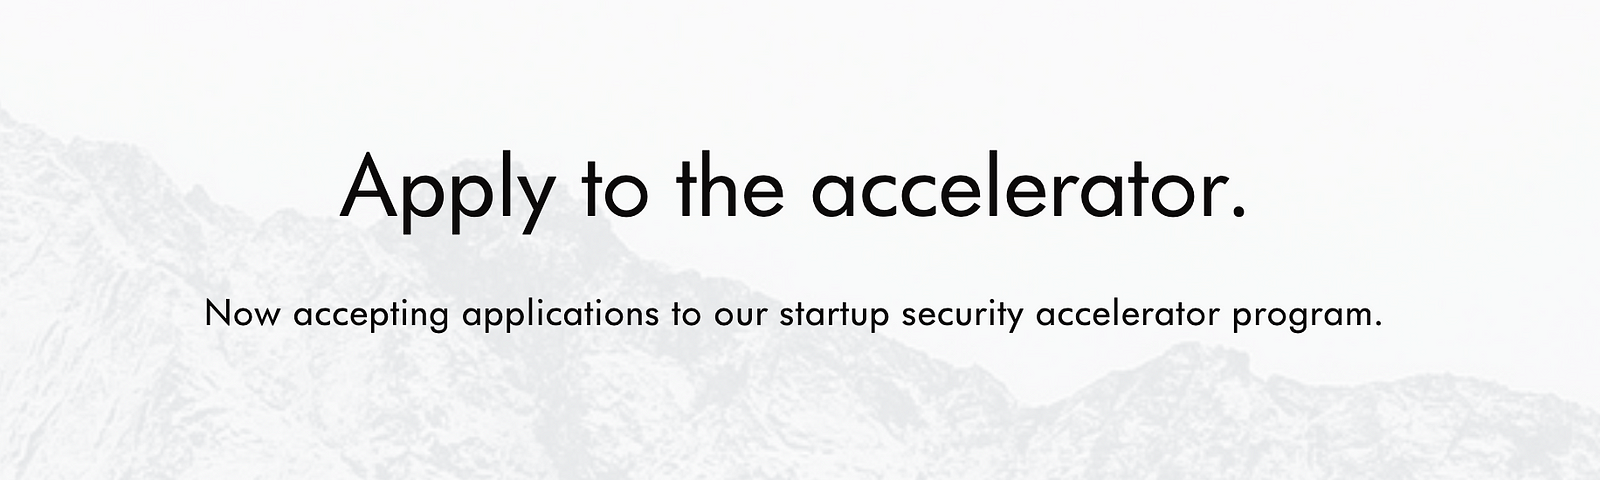 Text stating, “Apply to the accelerator, now accepting applications to our startup security accelerator program.”